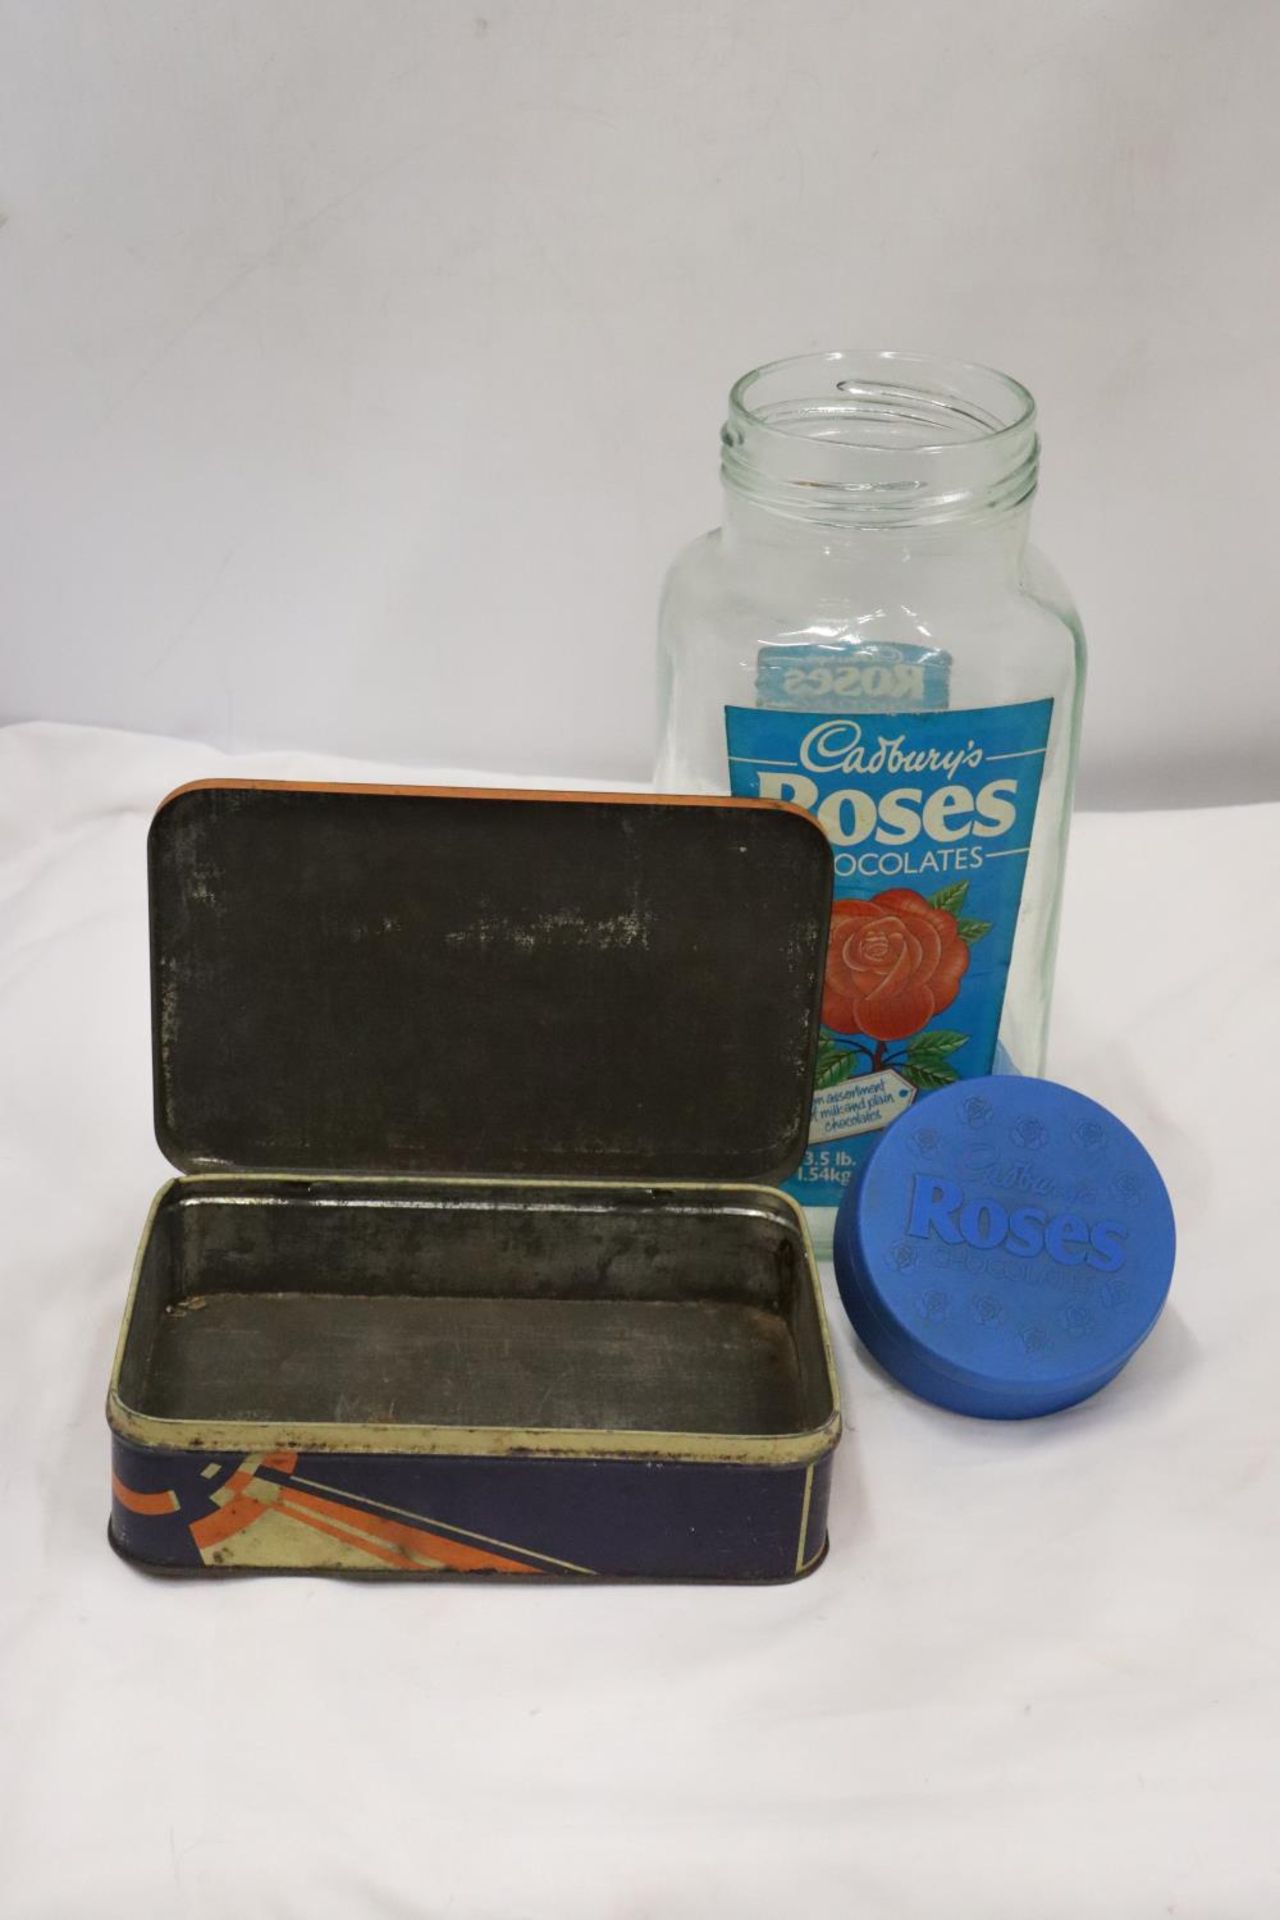 A CADBURY'S ROSES CHOCATE SWEET JAR AND A MAISON LYONS CHOCOLATE BISCUITS TIN